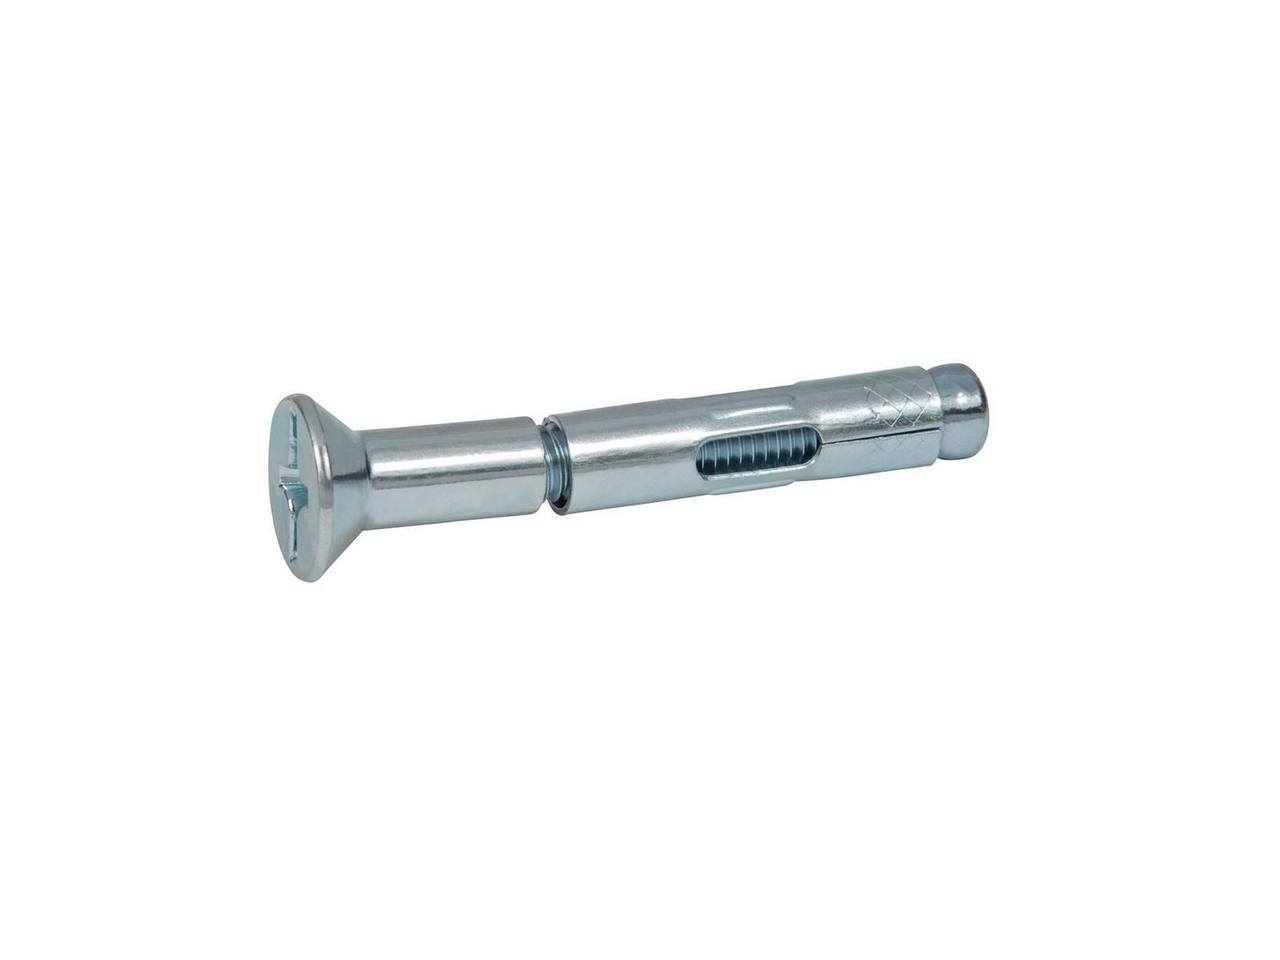 UNIFAST #6730 HOLLOW WALL EXPANSION ANCHOR 2" LENGTH FOR 3/8"-5/8" WALLS 